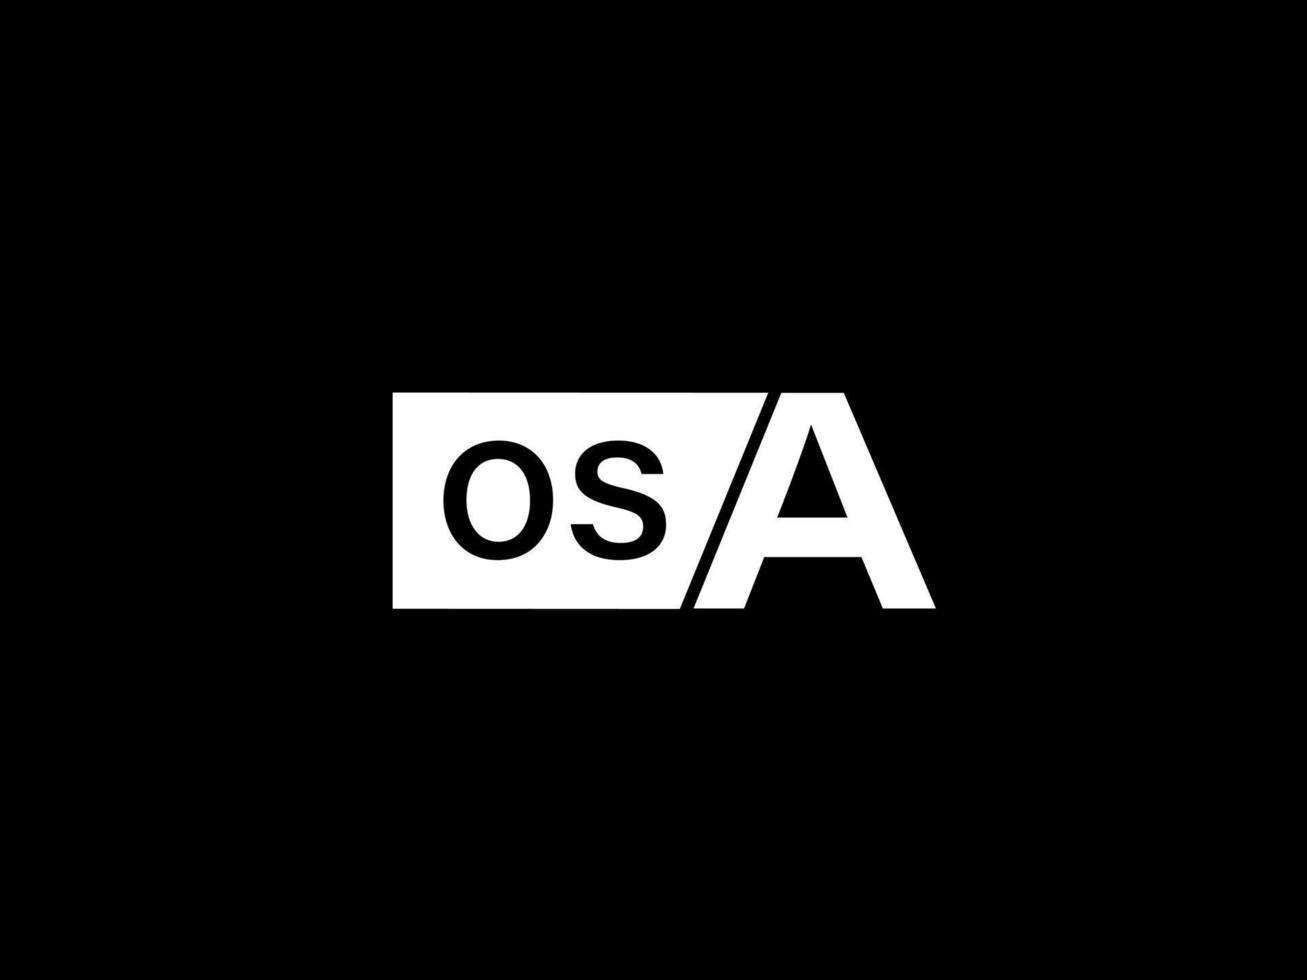 OSA Logo and Graphics design vector art, Icons isolated on black background